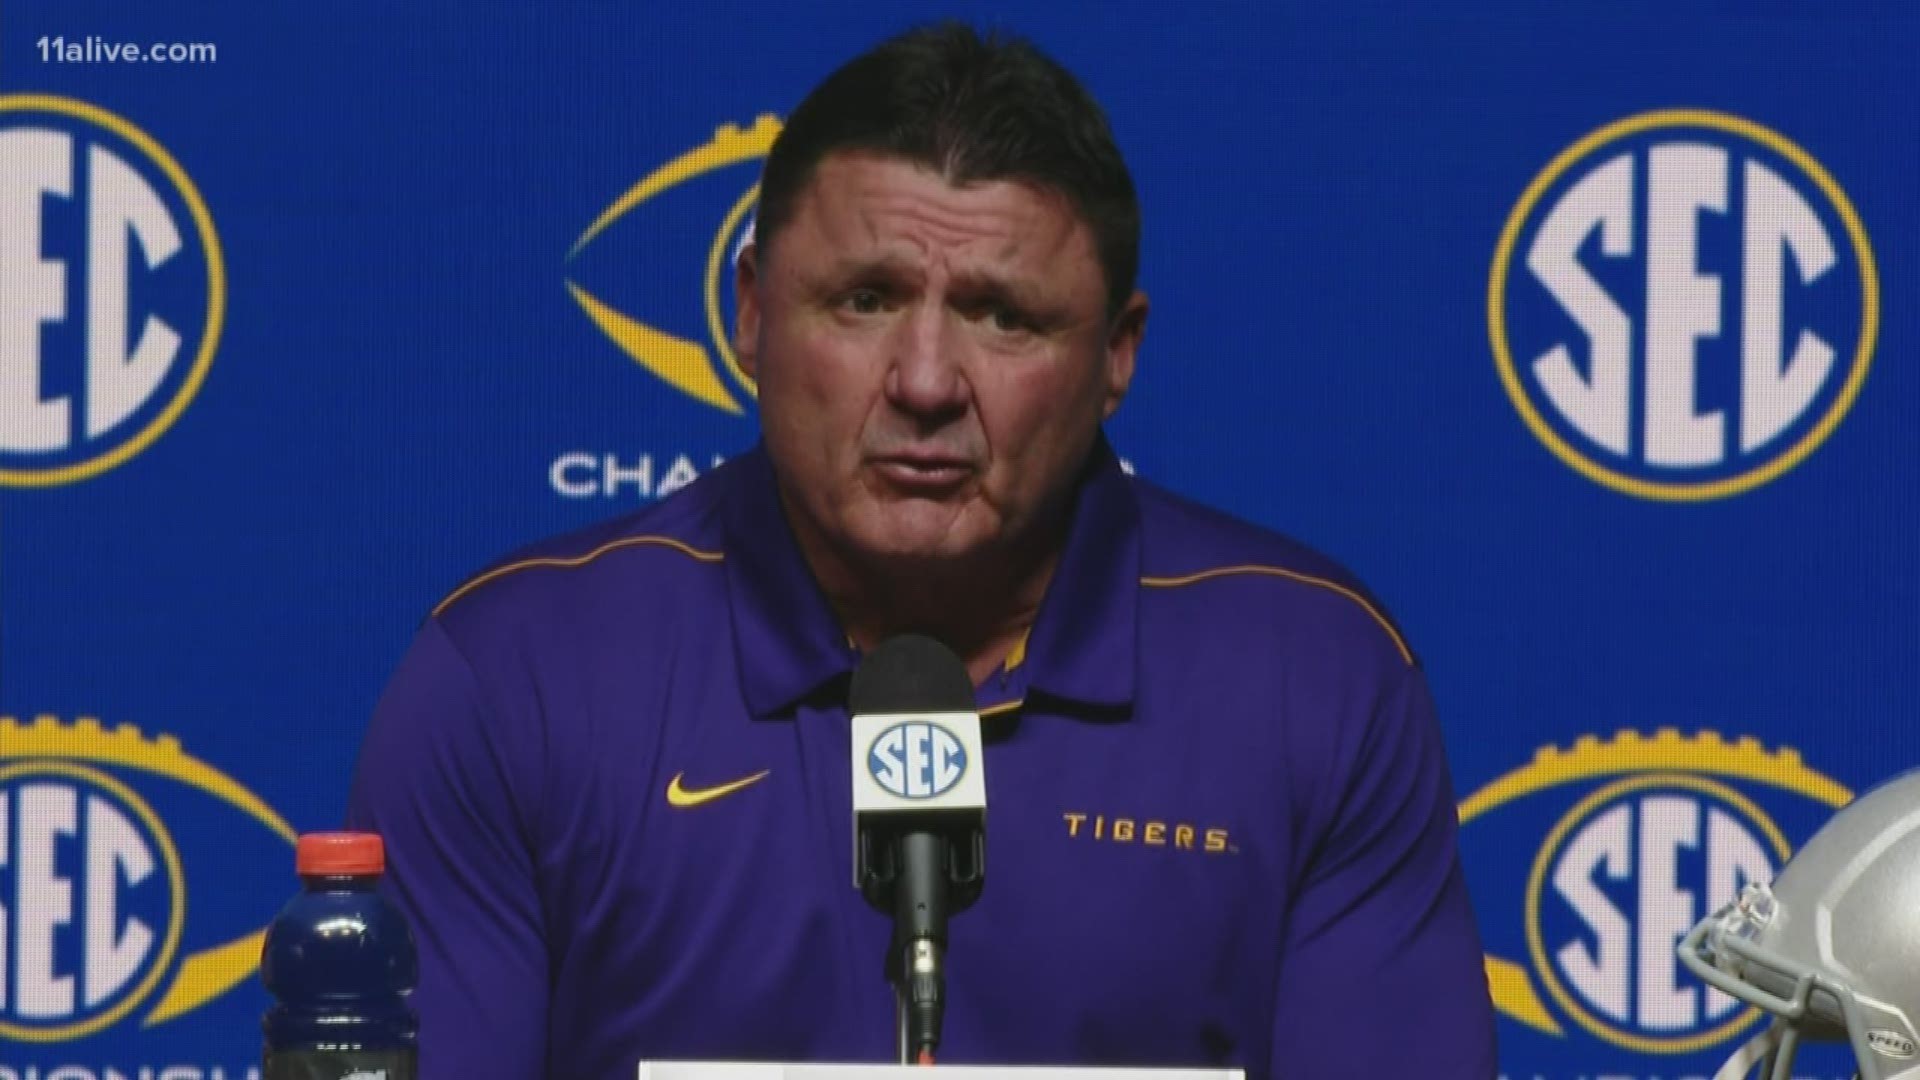 Orgeron: "These guys are committed to excellence"